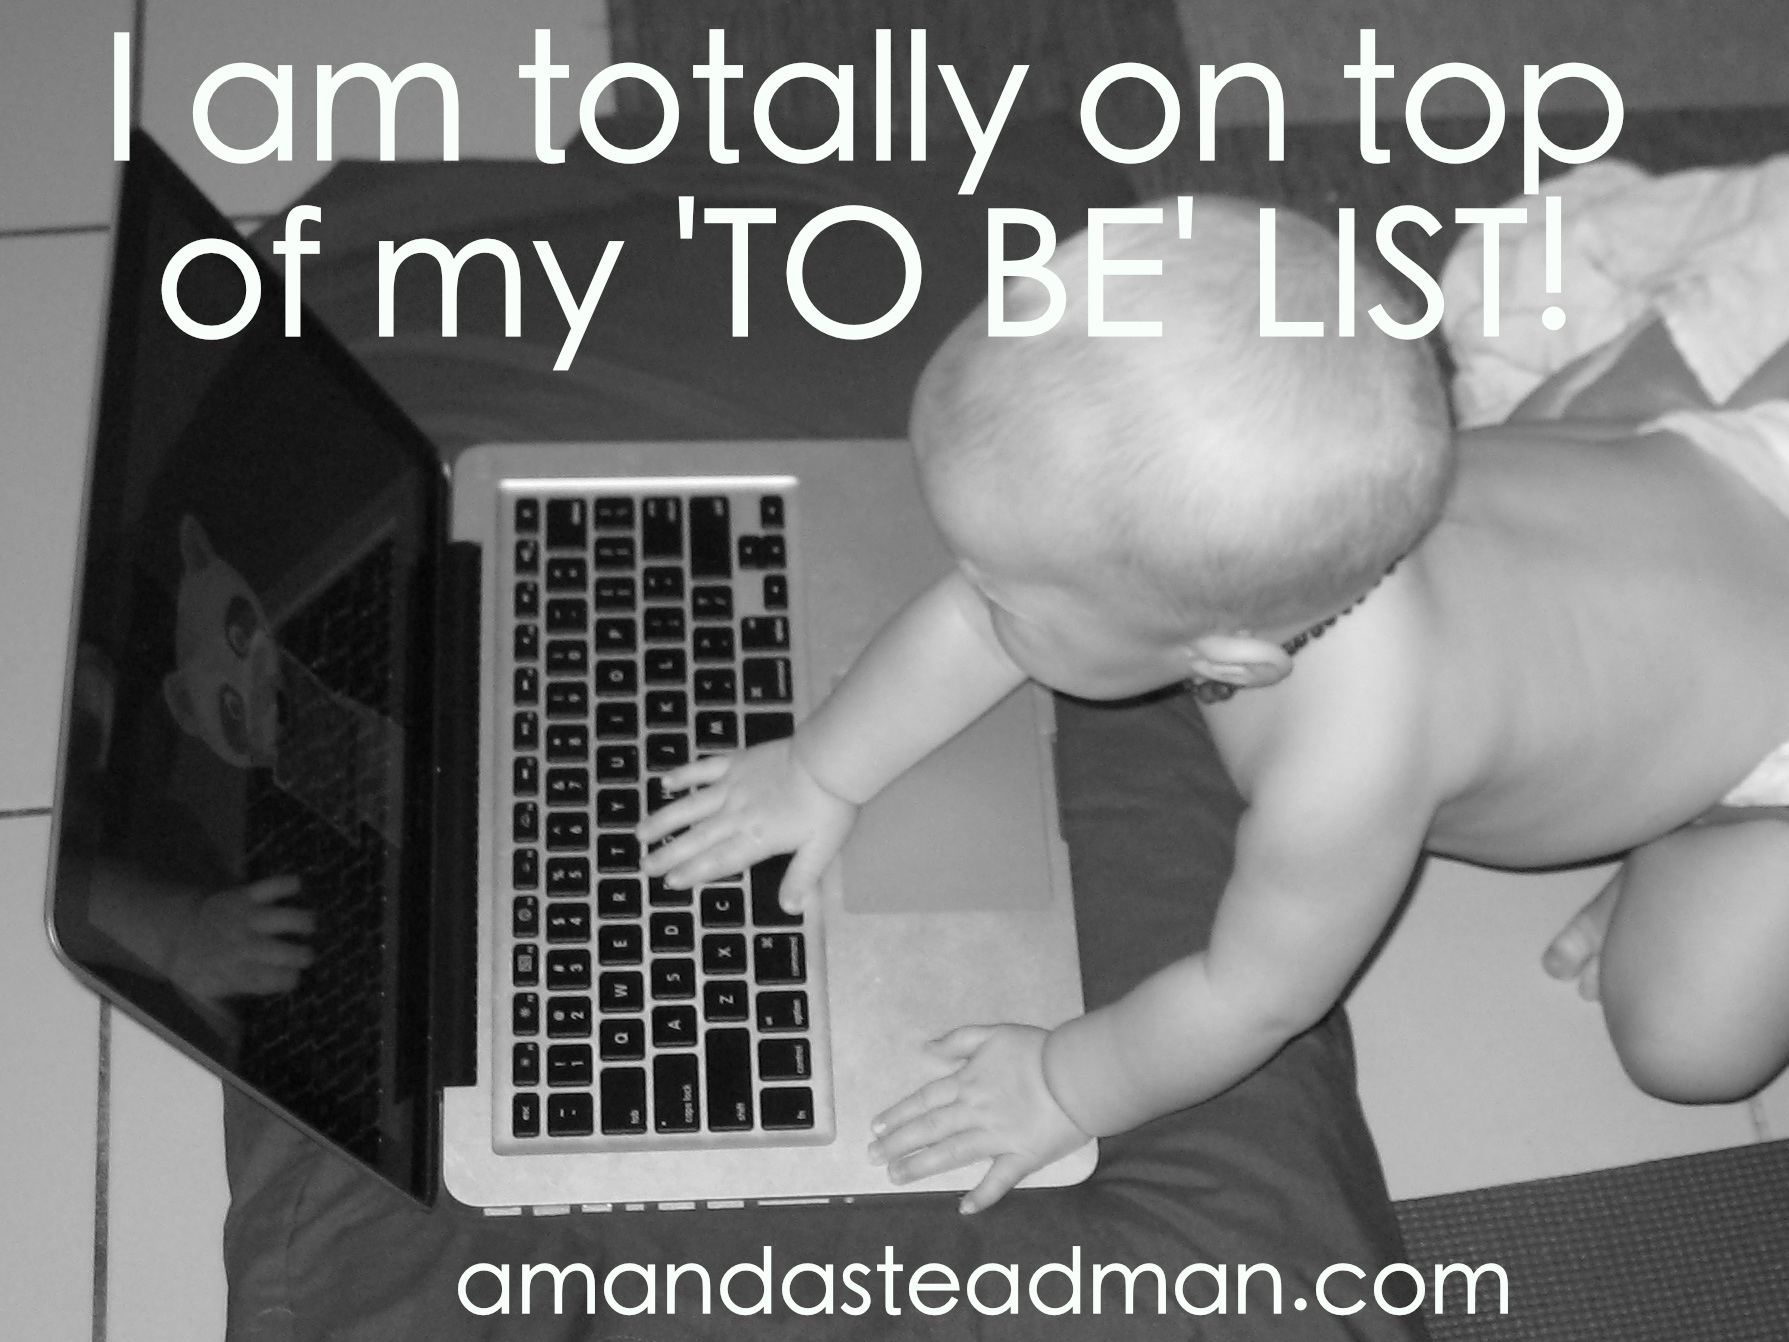 TO BE LIST pic quote